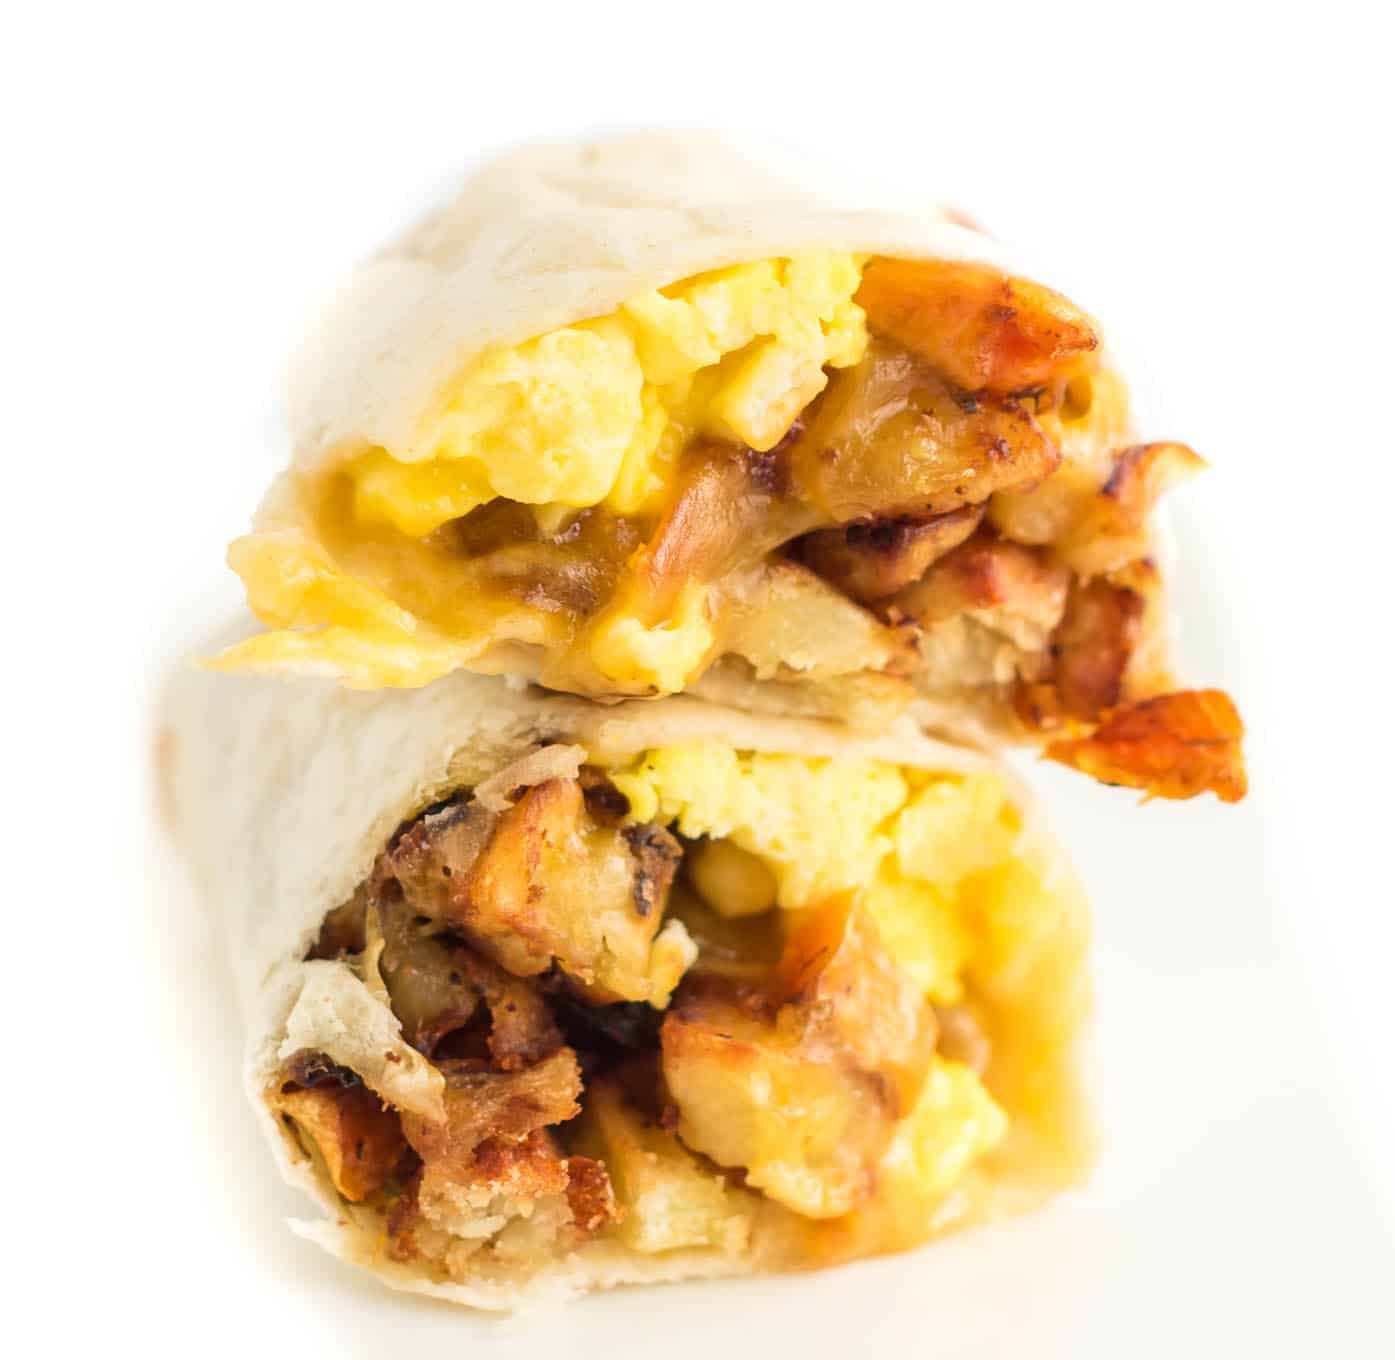 burrito cut in half stacked on top of each other